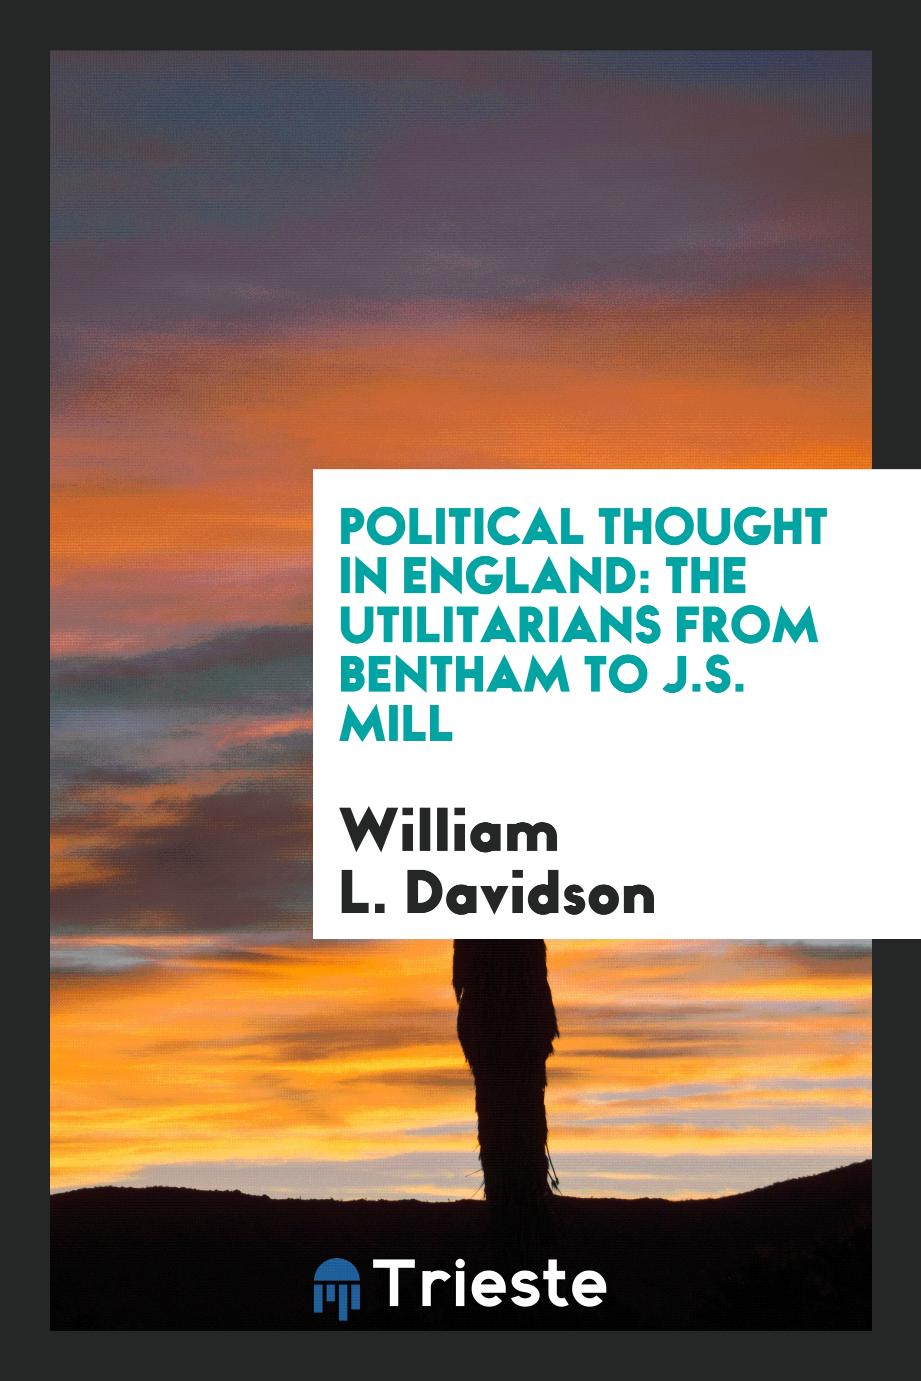 Political thought in England: the Utilitarians from Bentham to J.S. Mill